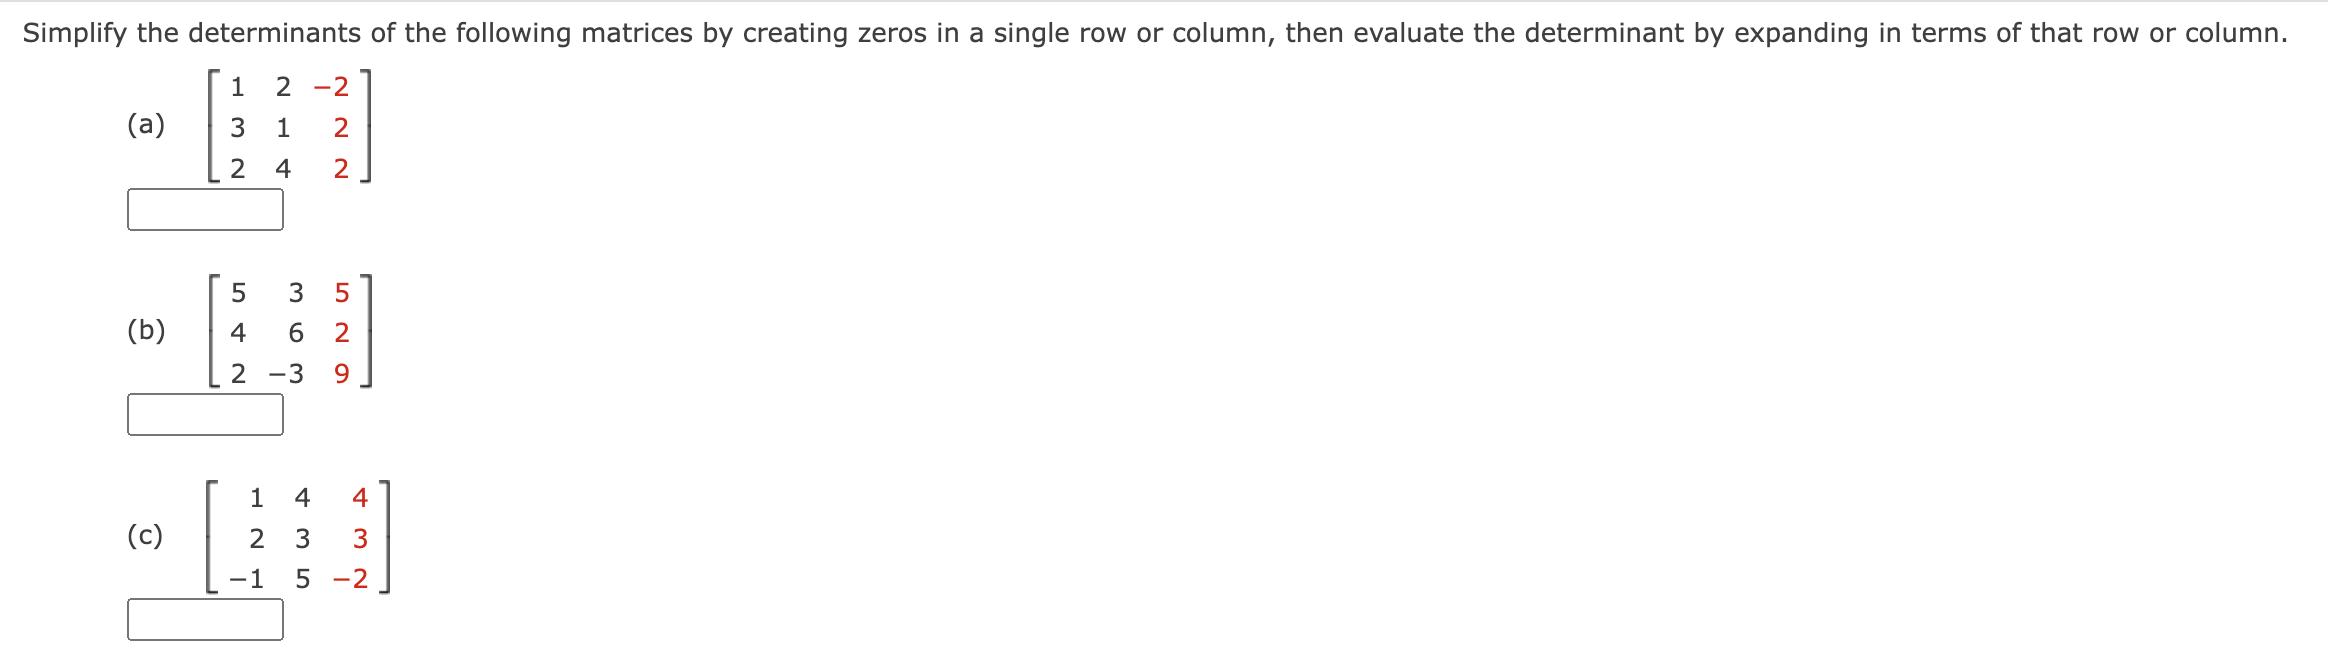 Simplify the determinants of the following matrices by creating zeros in a single row or column, then evaluate the determinan